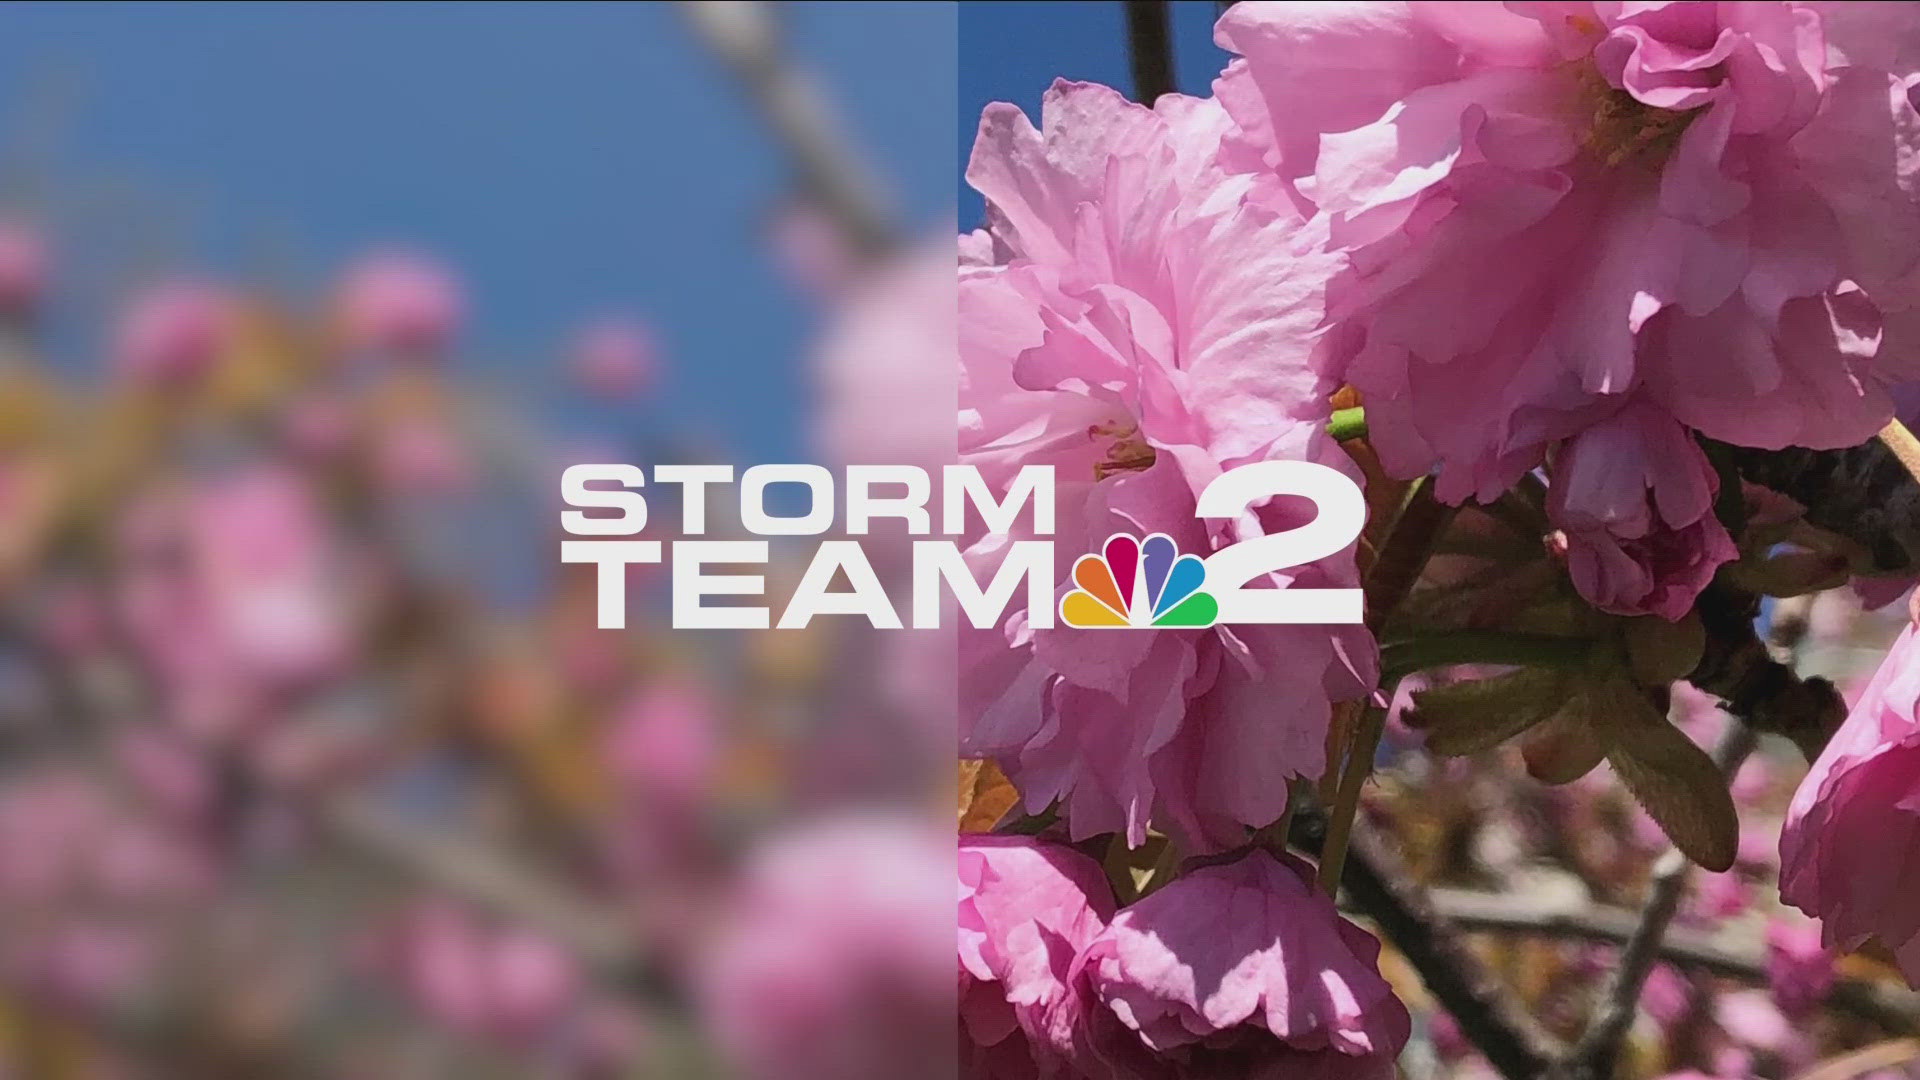 Storm Team 2 night forecast with Jennifer Stanonis for Wednesday, May 15.